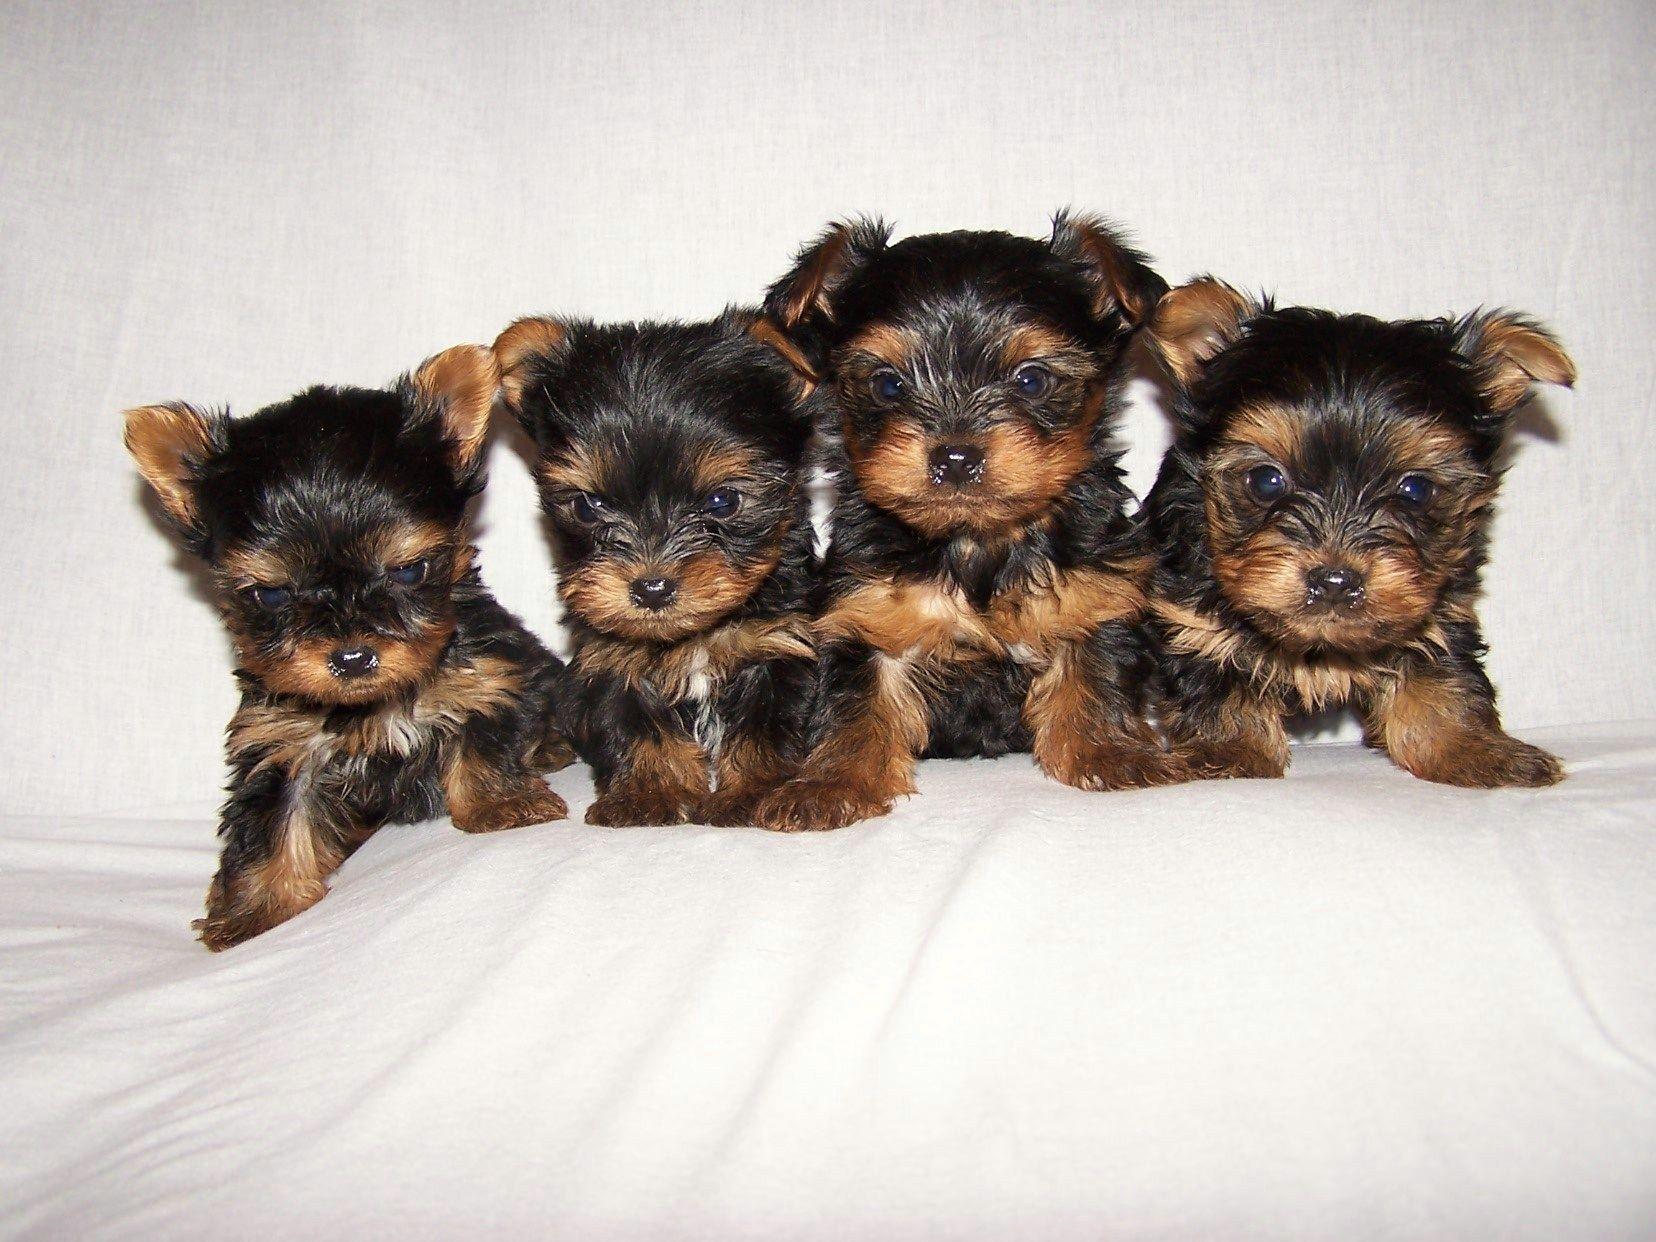 Yorkie Puppies Wallpapers - Top Free Yorkie Puppies Backgrounds ...